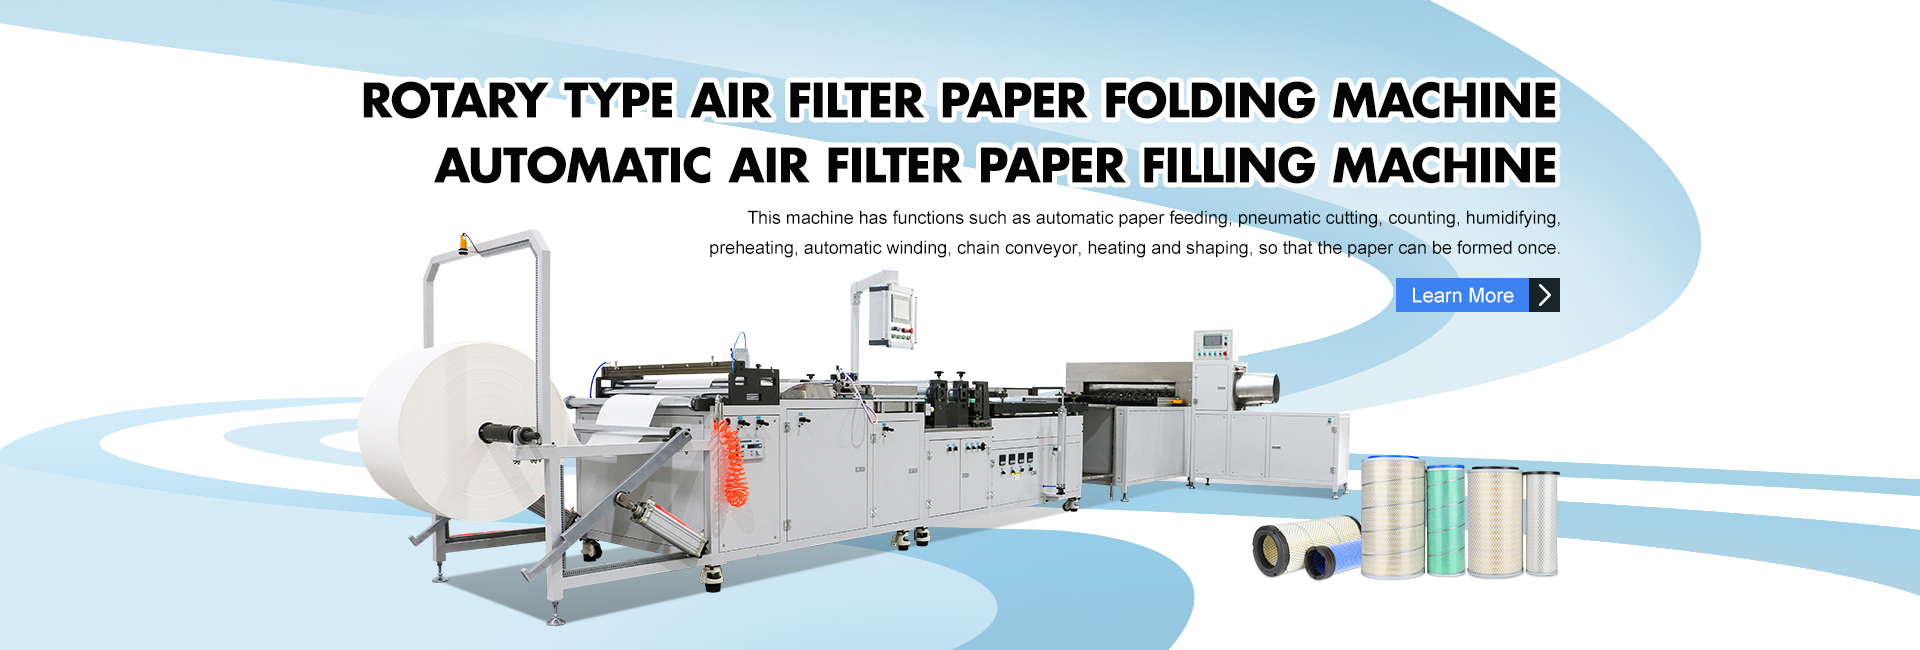 Rotary Type Air Filter Paper Folding Machine